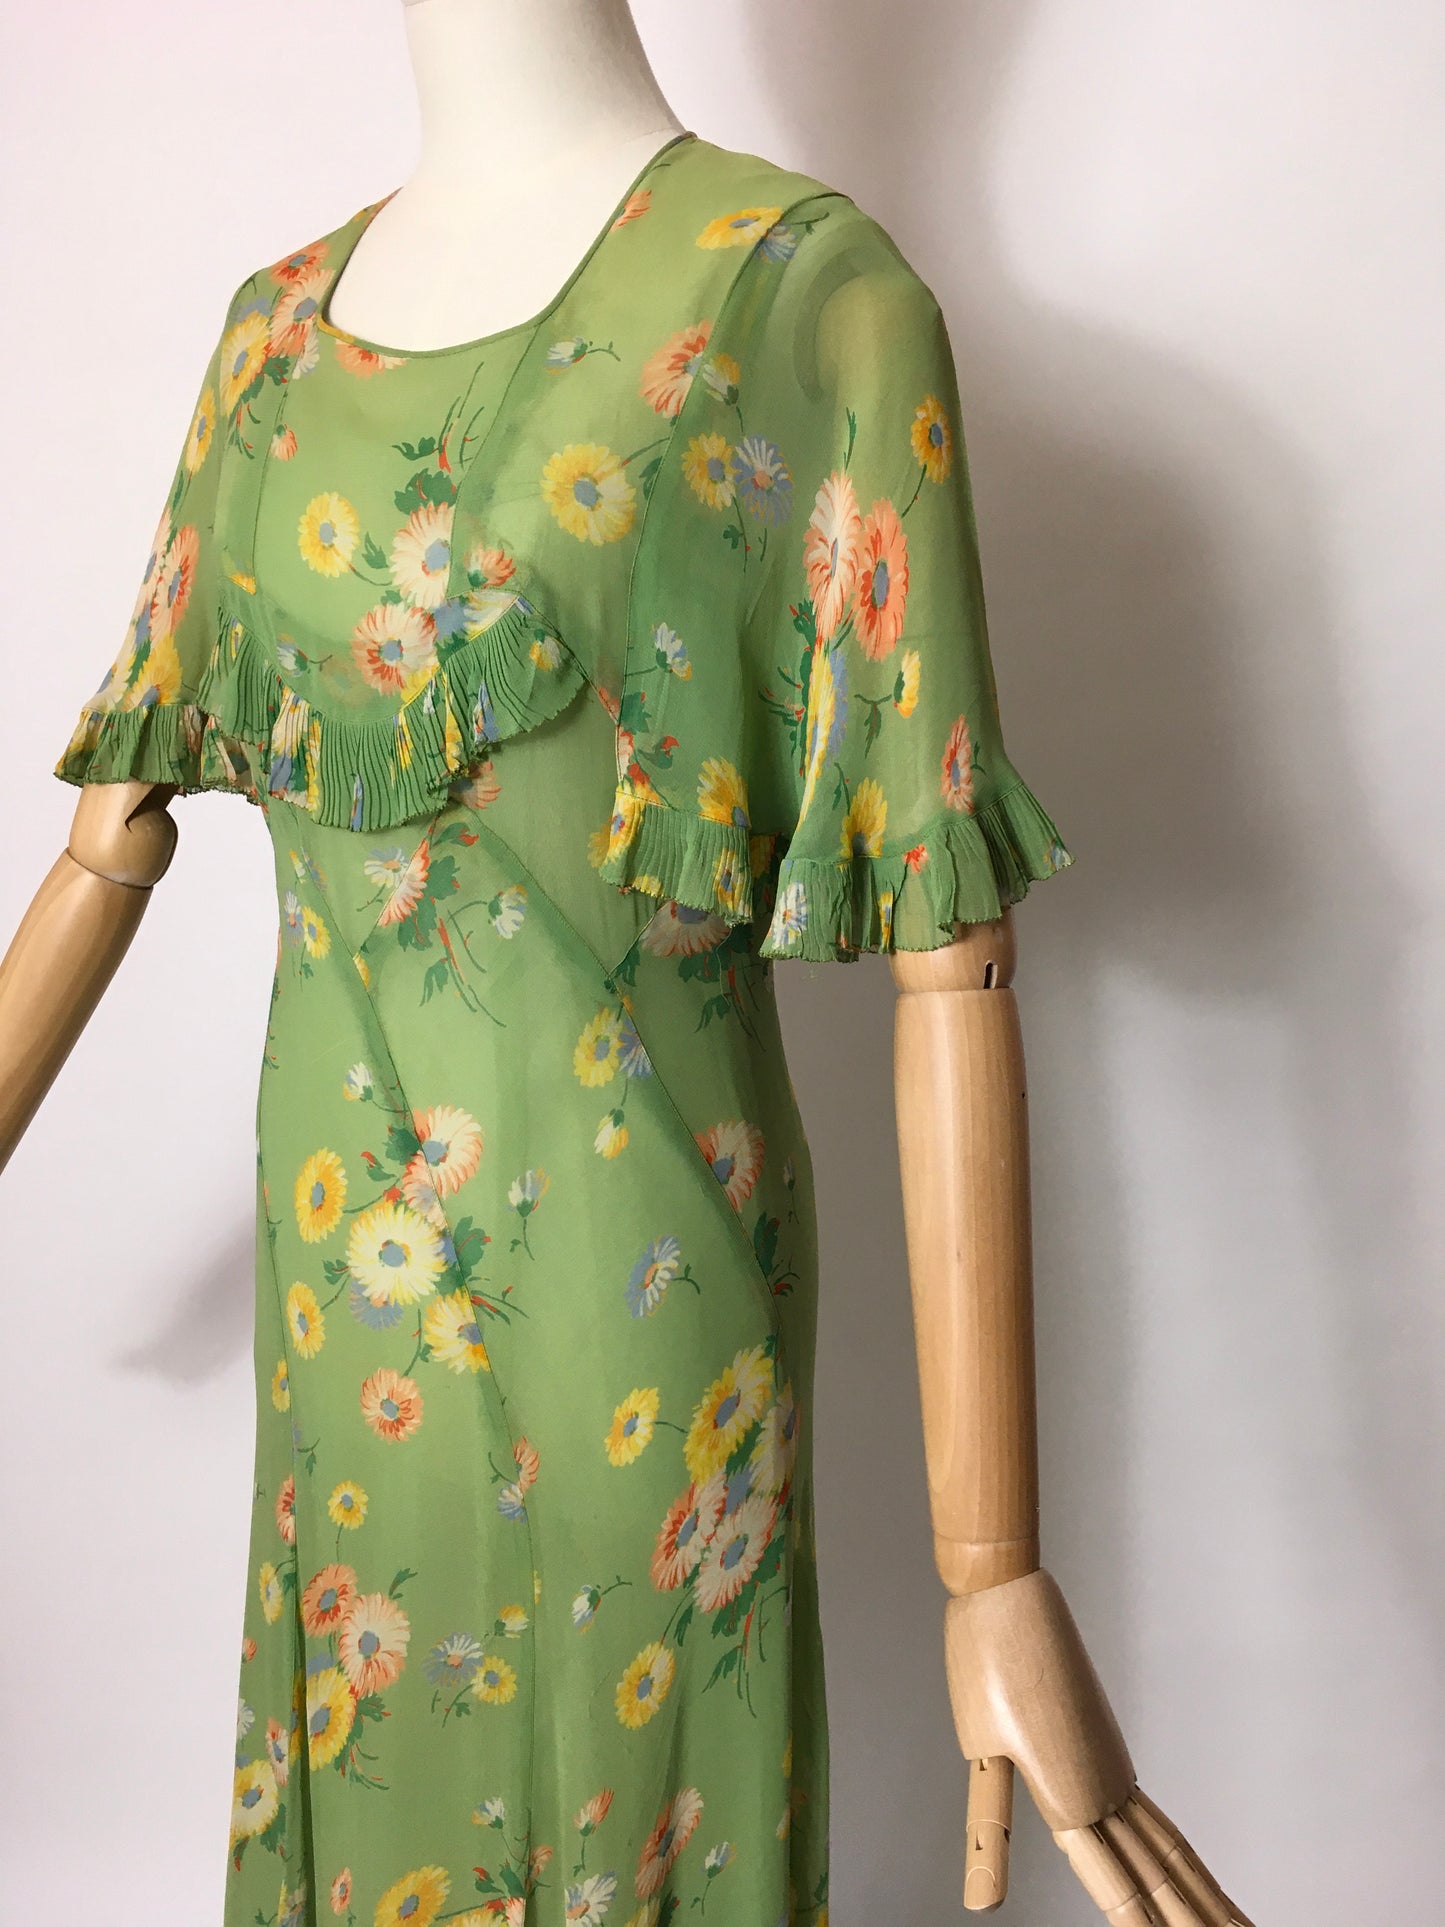 Original 1930’s Bias Cut Gown In An Exquisite Colour Pallet of Deco Green, soft blues, oranges and yellows - A Festival Of Vintage Fashion Show Exclusive